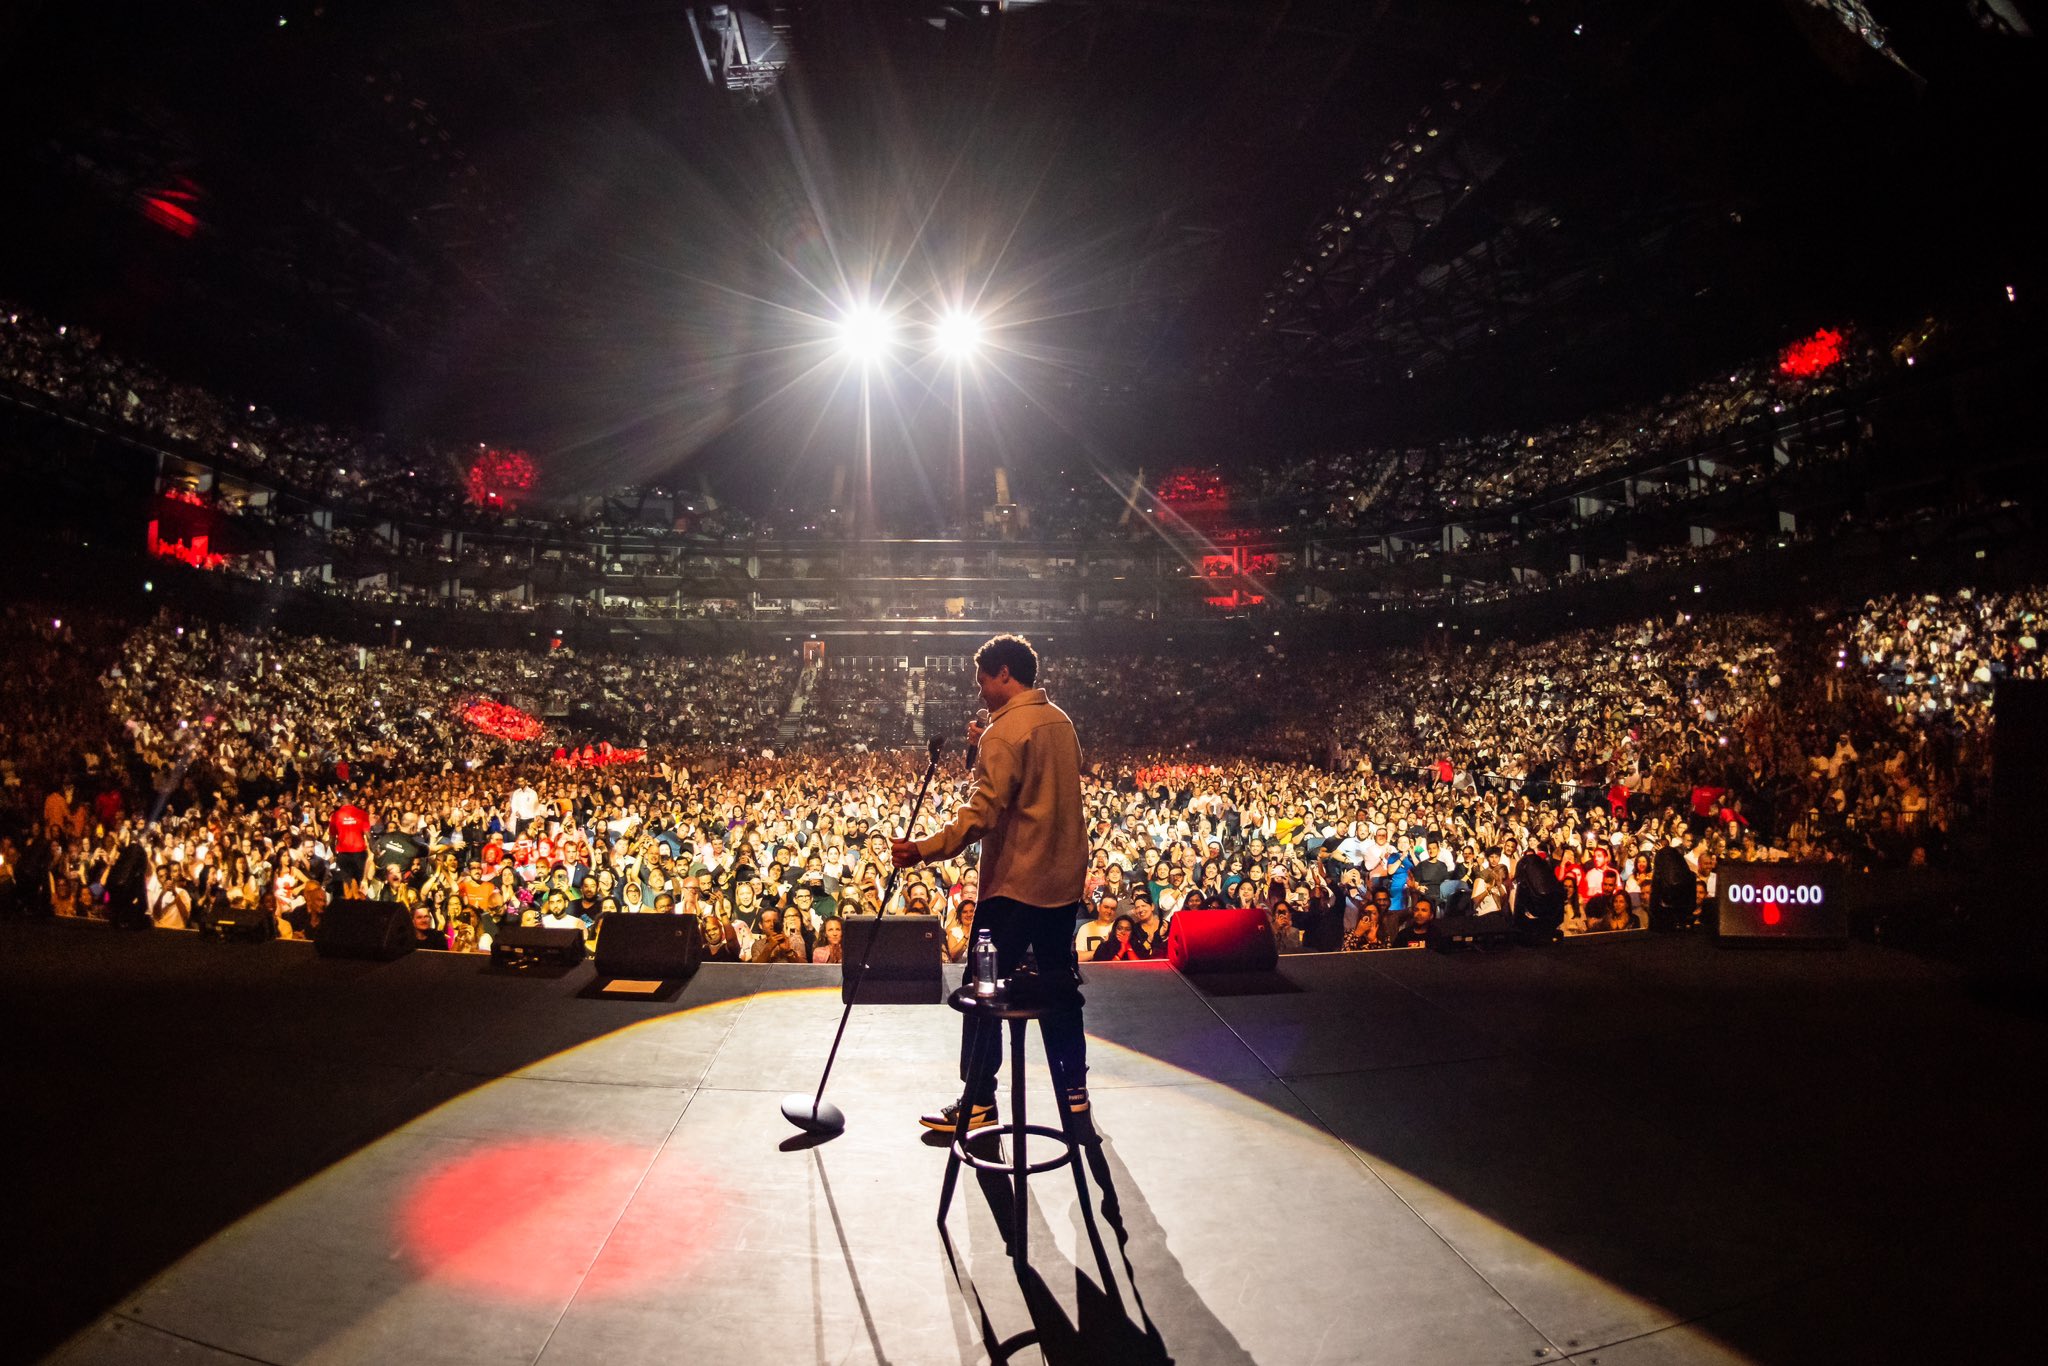 Trevor Noah is 1st comedian to sell out at Dubai arena